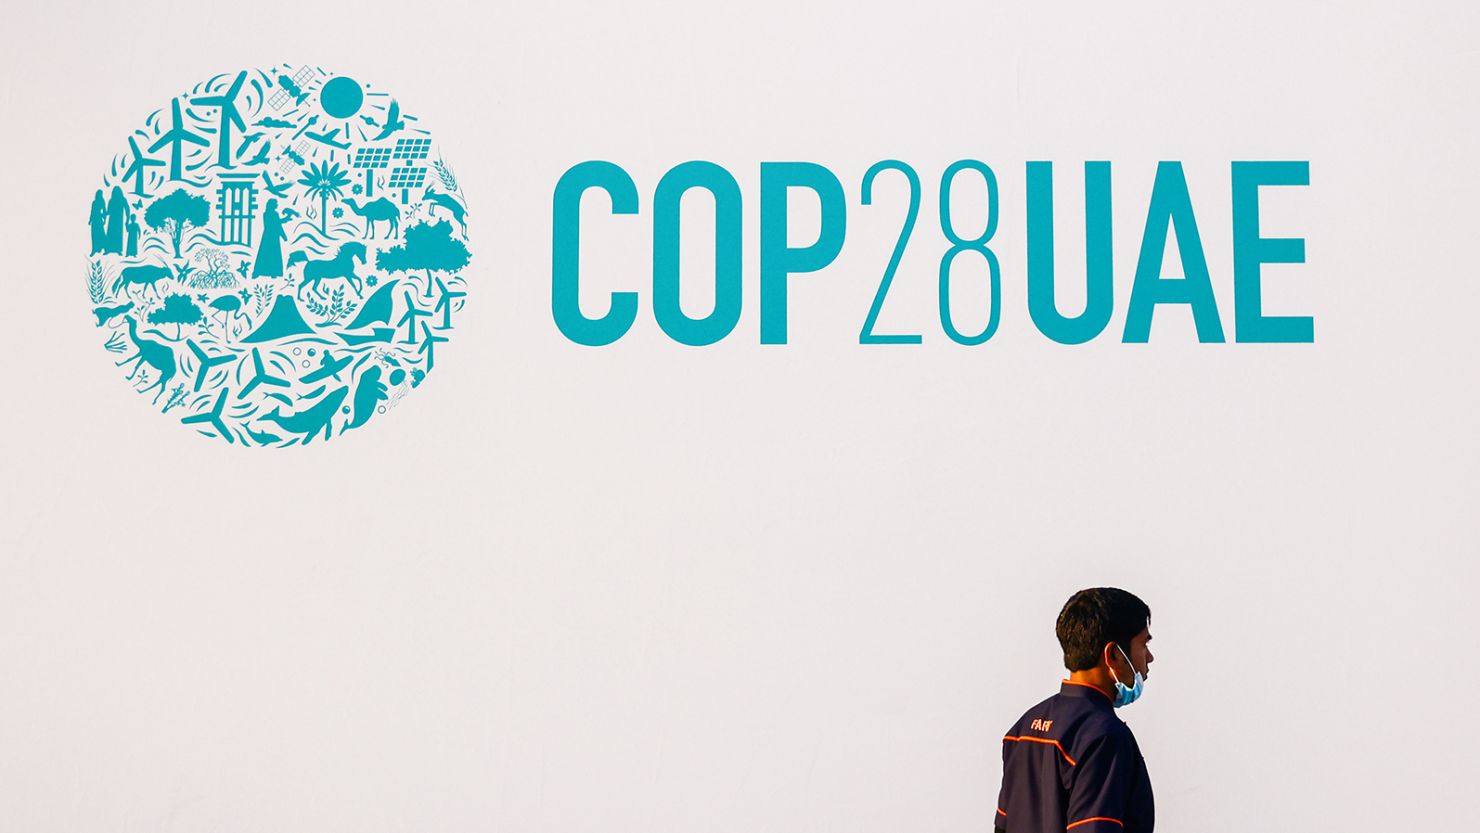 A logo of COP28 UAE, the 28th Conference of the Parties to the United Nations Framework Convention on Climate Change, which takes place on 30 November until 12 December 2023 in Expo City Dubai. Dubai, United Arab Emirates on November 27, 2023.